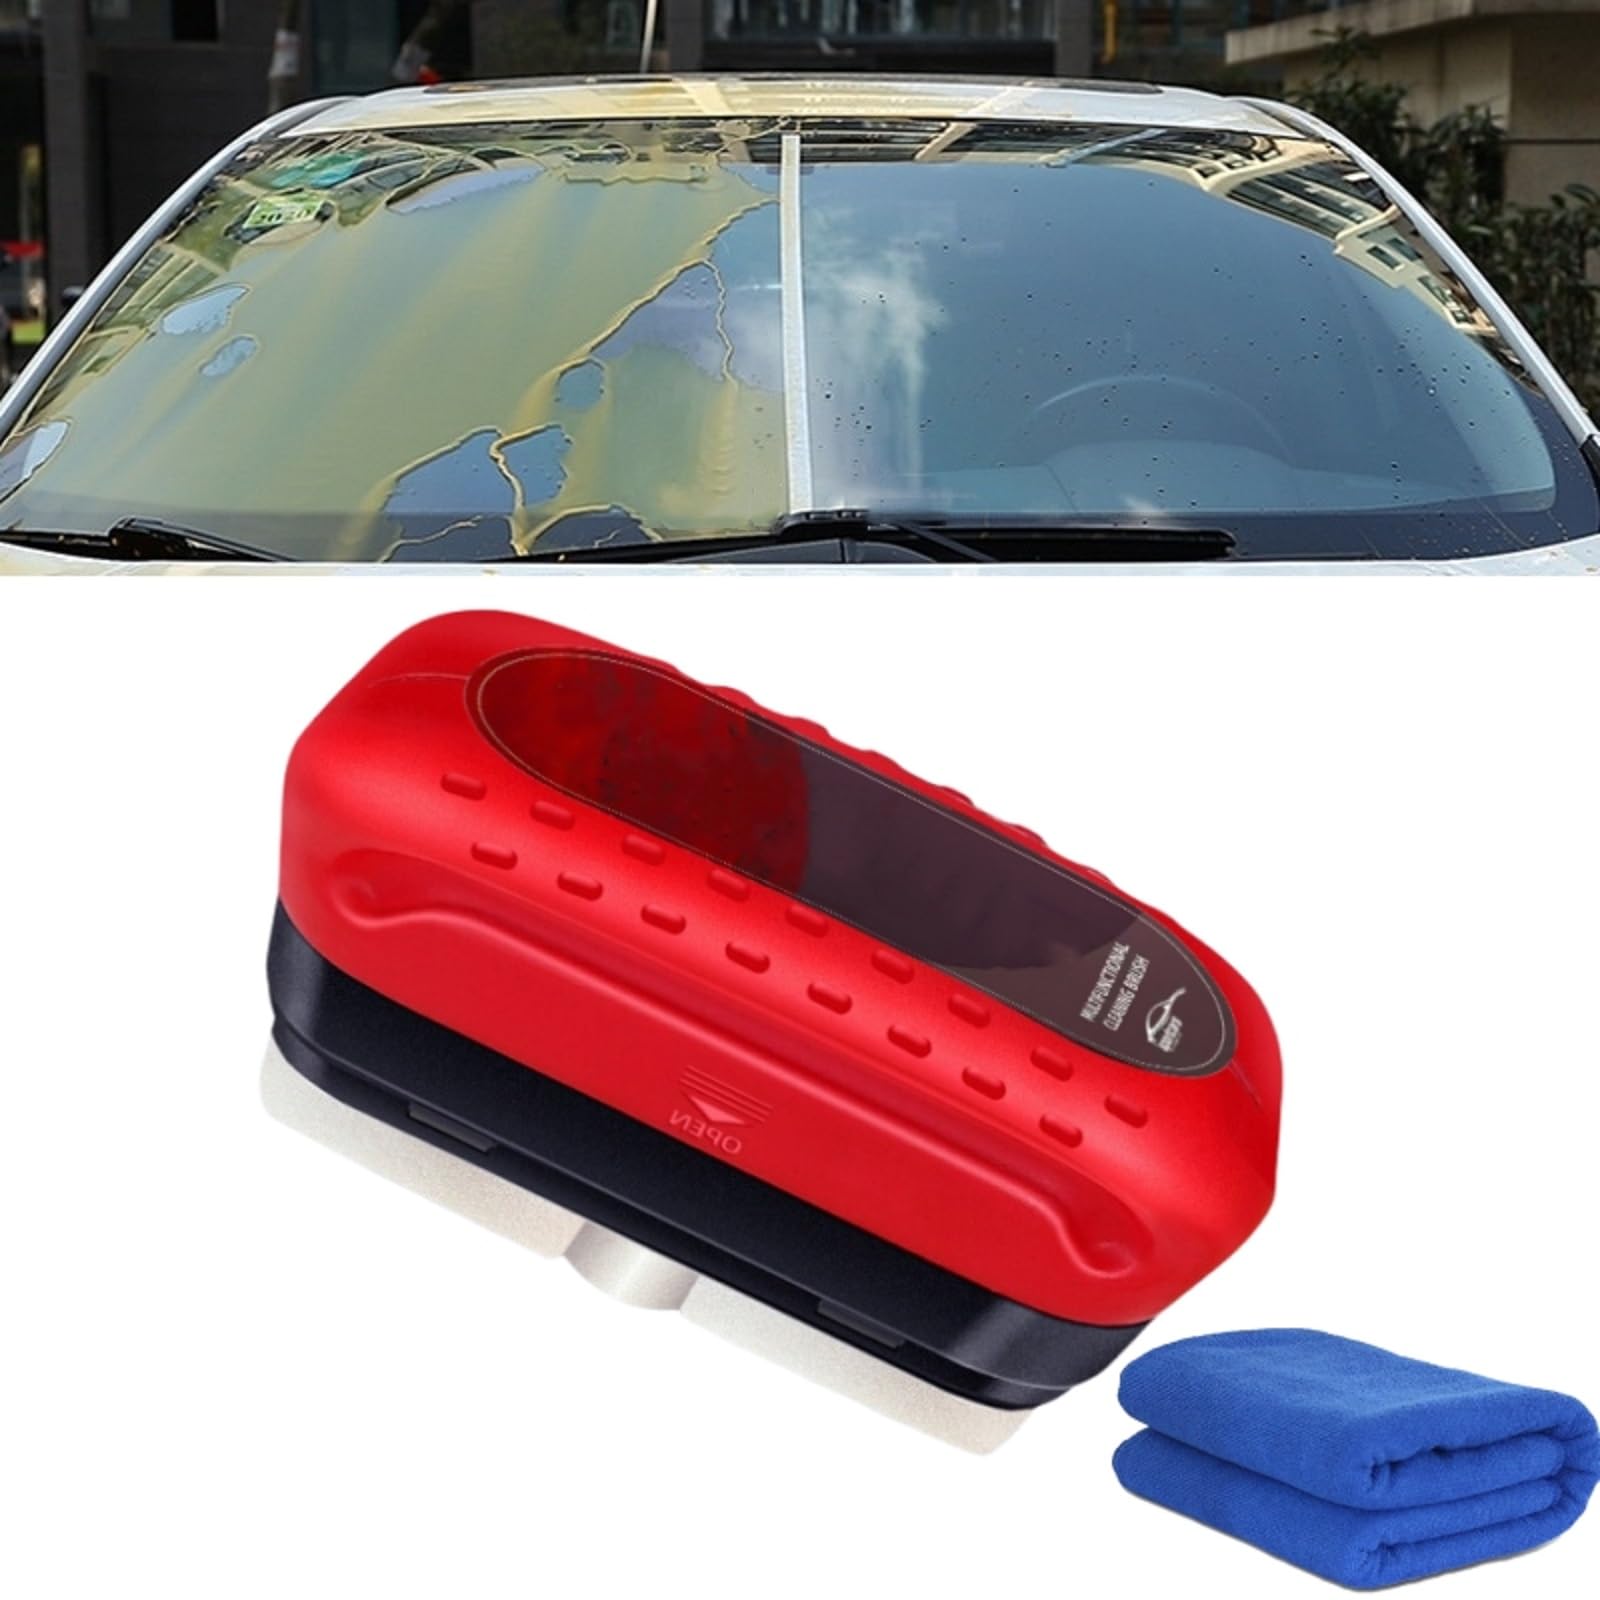 Louisx Glass Cleaning Board, Seedhubtok Glass Cleaning Board, Glass Coating for Windshield, Improves Clarity and Visibility for Enhancing The Visual Effects of Automotive Windshields (Red(1pc)) von Lioncool